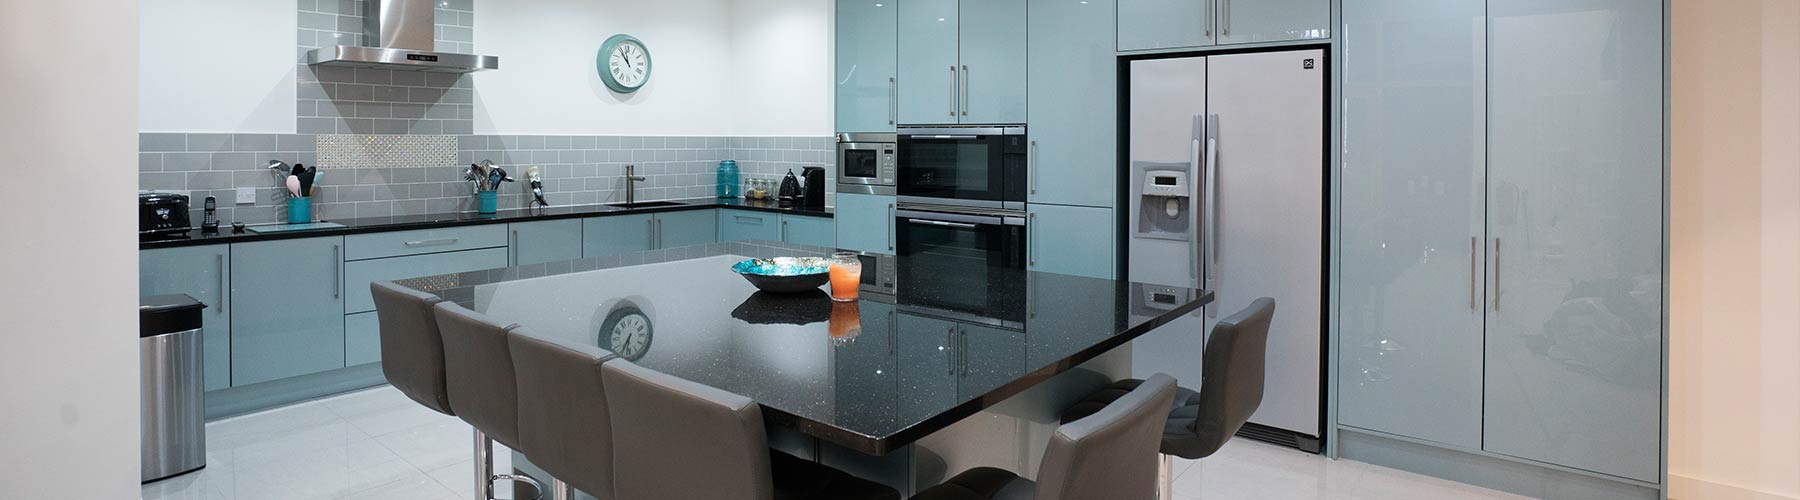 Large blue gloss kitchen with granite worktops and large island.